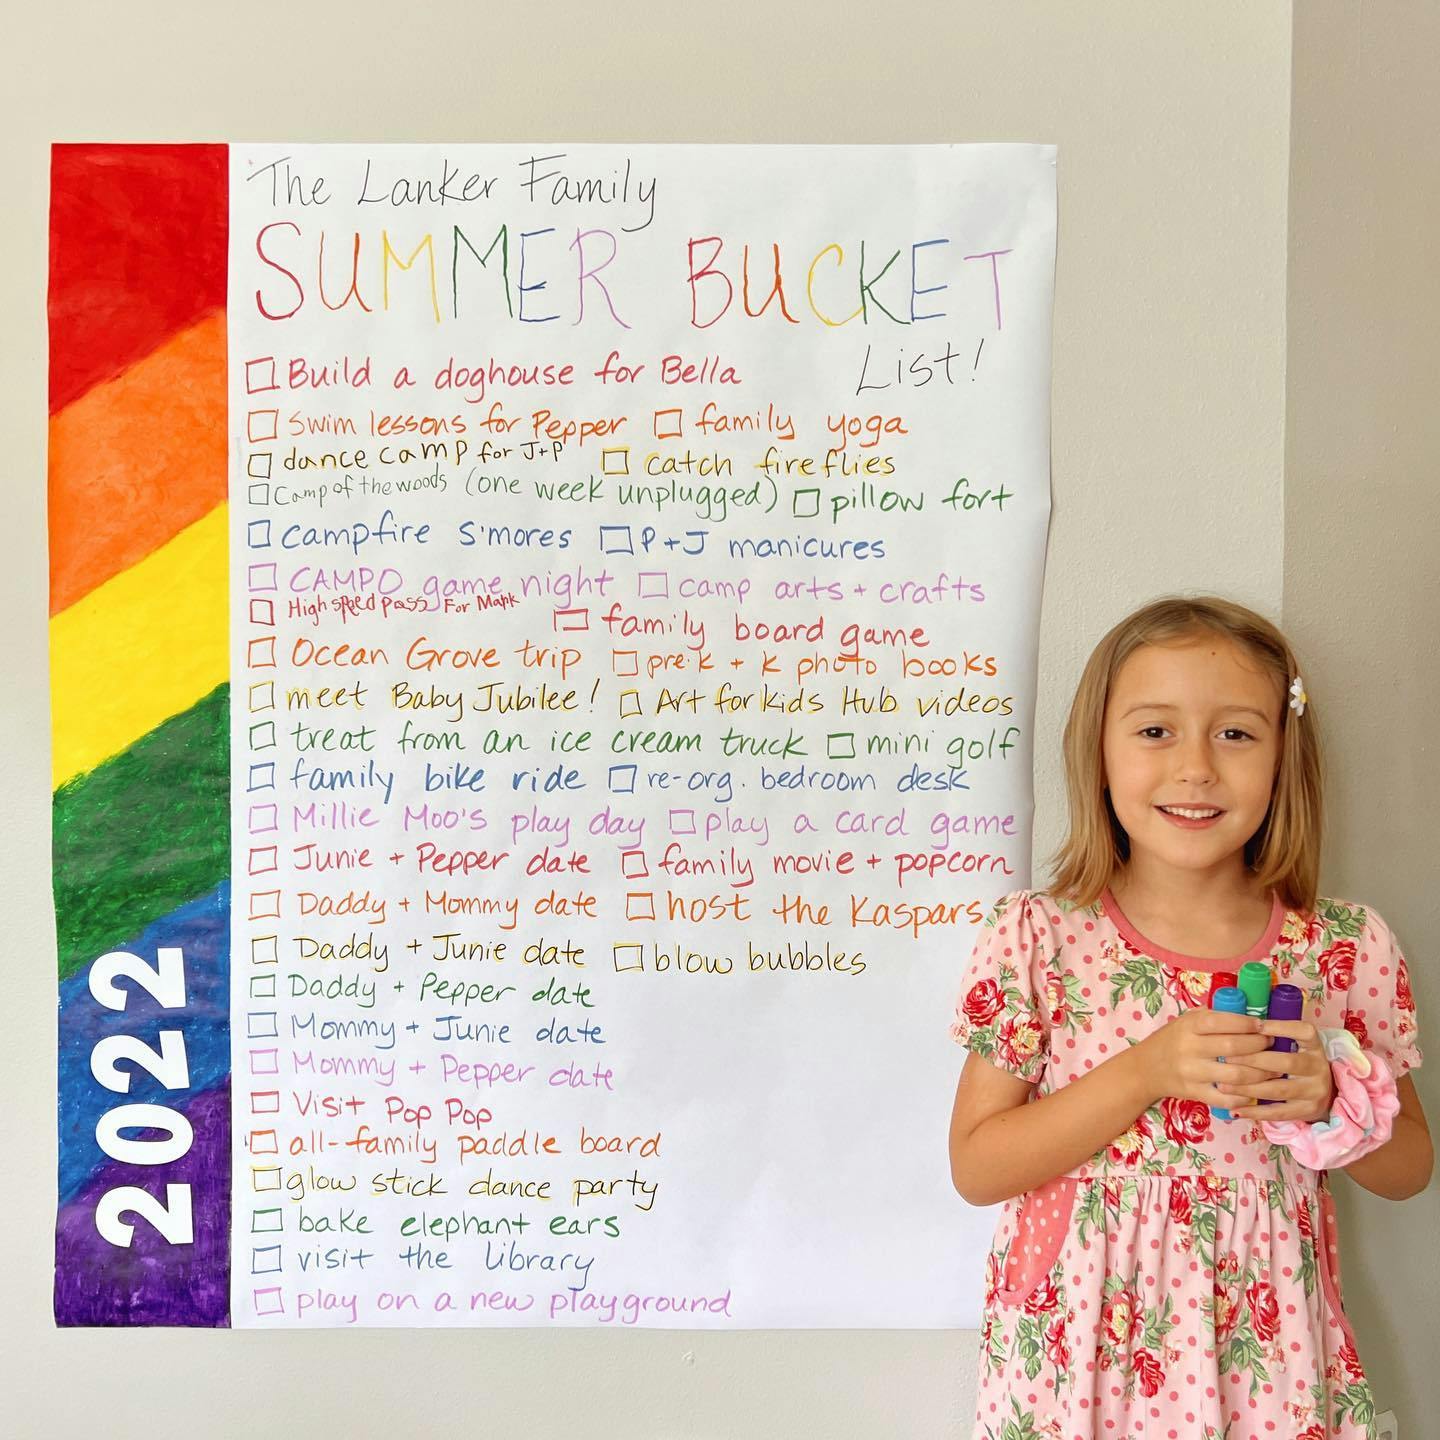 ☀️ Summer 2022, we're comin' for ya!
😎
Last summer, a new family tradition was born. We created our first Lanker Family Summer Bucket List, and it led to a summer full of memory-making and quality family time and duo dates.
🥰
Shout-out to my friend @abbielynnabbott for 100% inspiring us to give this a go last year. She has been sharing her family summer bucket lists on Instagram over the years, and her @SummitBaseCamp blog post gave me the pep talk I needed to take the leap and create our first bucket list.
🪣
It was such a win for all four of us, it was a no-brainer that we’d be creating a bucket list every summer henceforth. And today was the day we tackled our 2022 Lanker Family Summer Bucket List!
🥳
Join me on the blog via my profile 🔗 for a run-down on the supplies we used, my tips for generating ideas, & 65 ideas from our own lists you can glean inspiration from.
💡
May we let our hopes spill.
✍️
May we let grace abound when we don't complete our lists.
🙏
May we take that trust fall and let a summer to remember unfold!
🗓
P.S. Save this post as inspo for when you create your 2022 summer bucket list!
🫶
#TheUnsinkableLankerFour #TheLankersLoveTravel #JuniperLanker
•
•
•
•
•
#summerbucketlist #bucketlistideas #summerbucketlist2022 #bucketlistadventures #bucketlisters #bucketlists #bucketlistfamily #bucketlistgoals #bucketlistnow #bucketlistlife #bucketlistadventure #bucketlister #bucketlistliving #summeractivitiesforkids #summeractivities #summitbasecamp